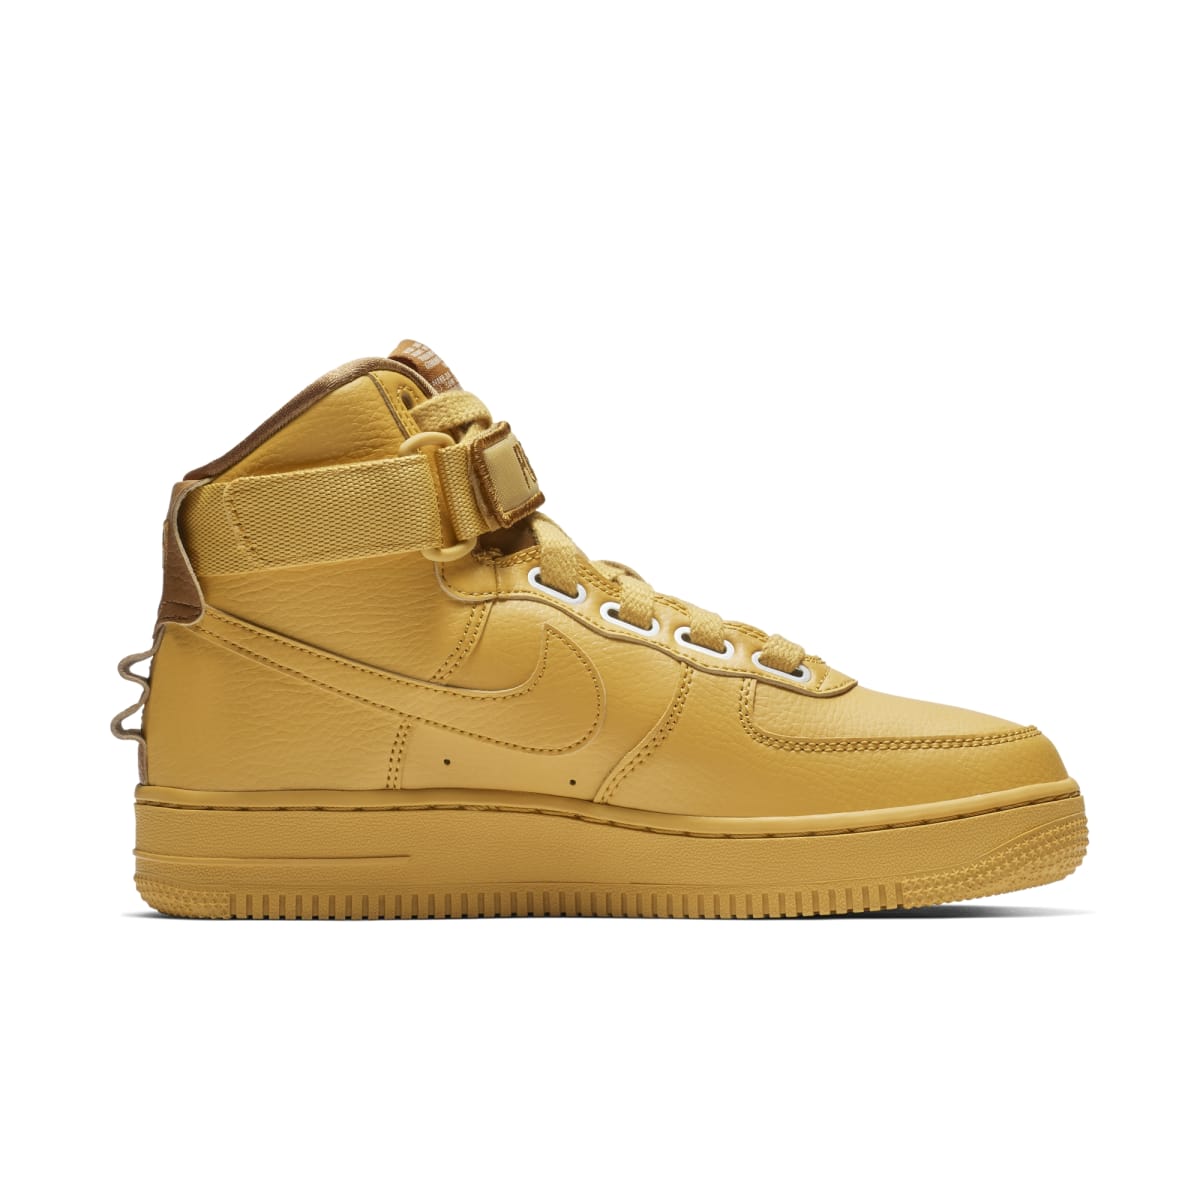 Nike Air Force 1 High Utility Shoes | Nike | Release Dates, Sneaker ...